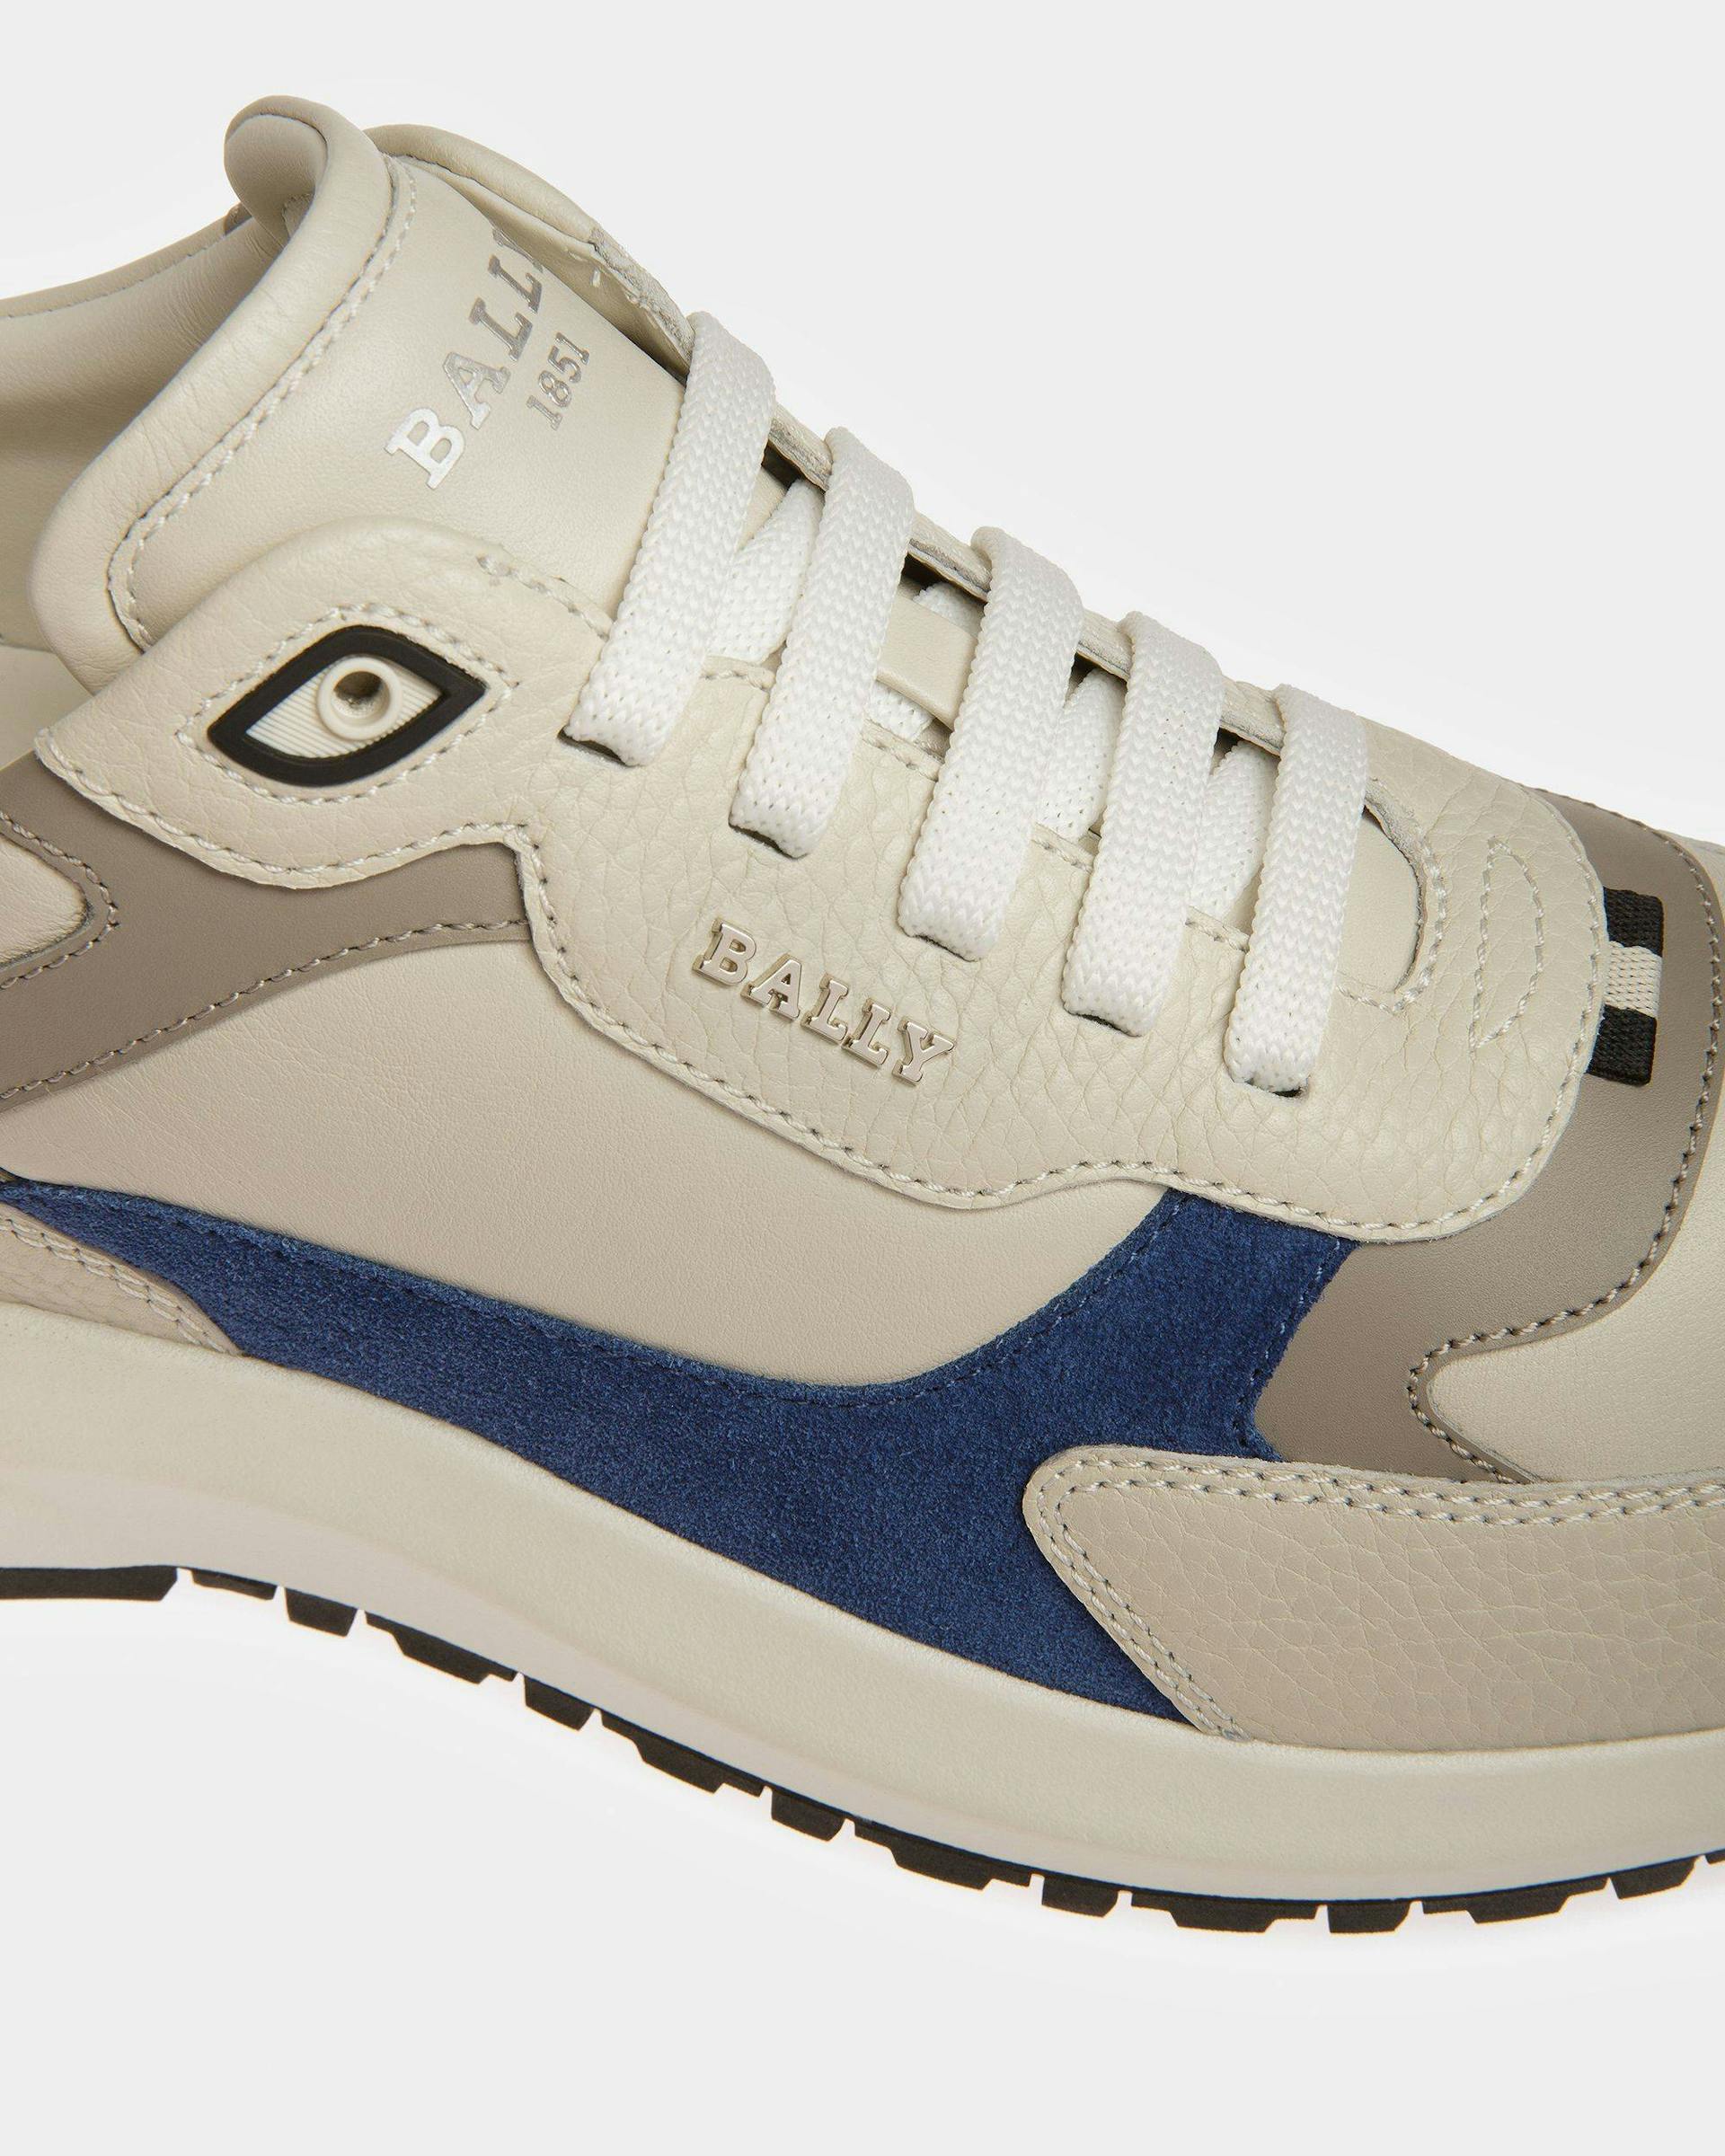 Dave Leather And Fabric Sneakers In Dusty White And Blue Neon - Men's - Bally - 05